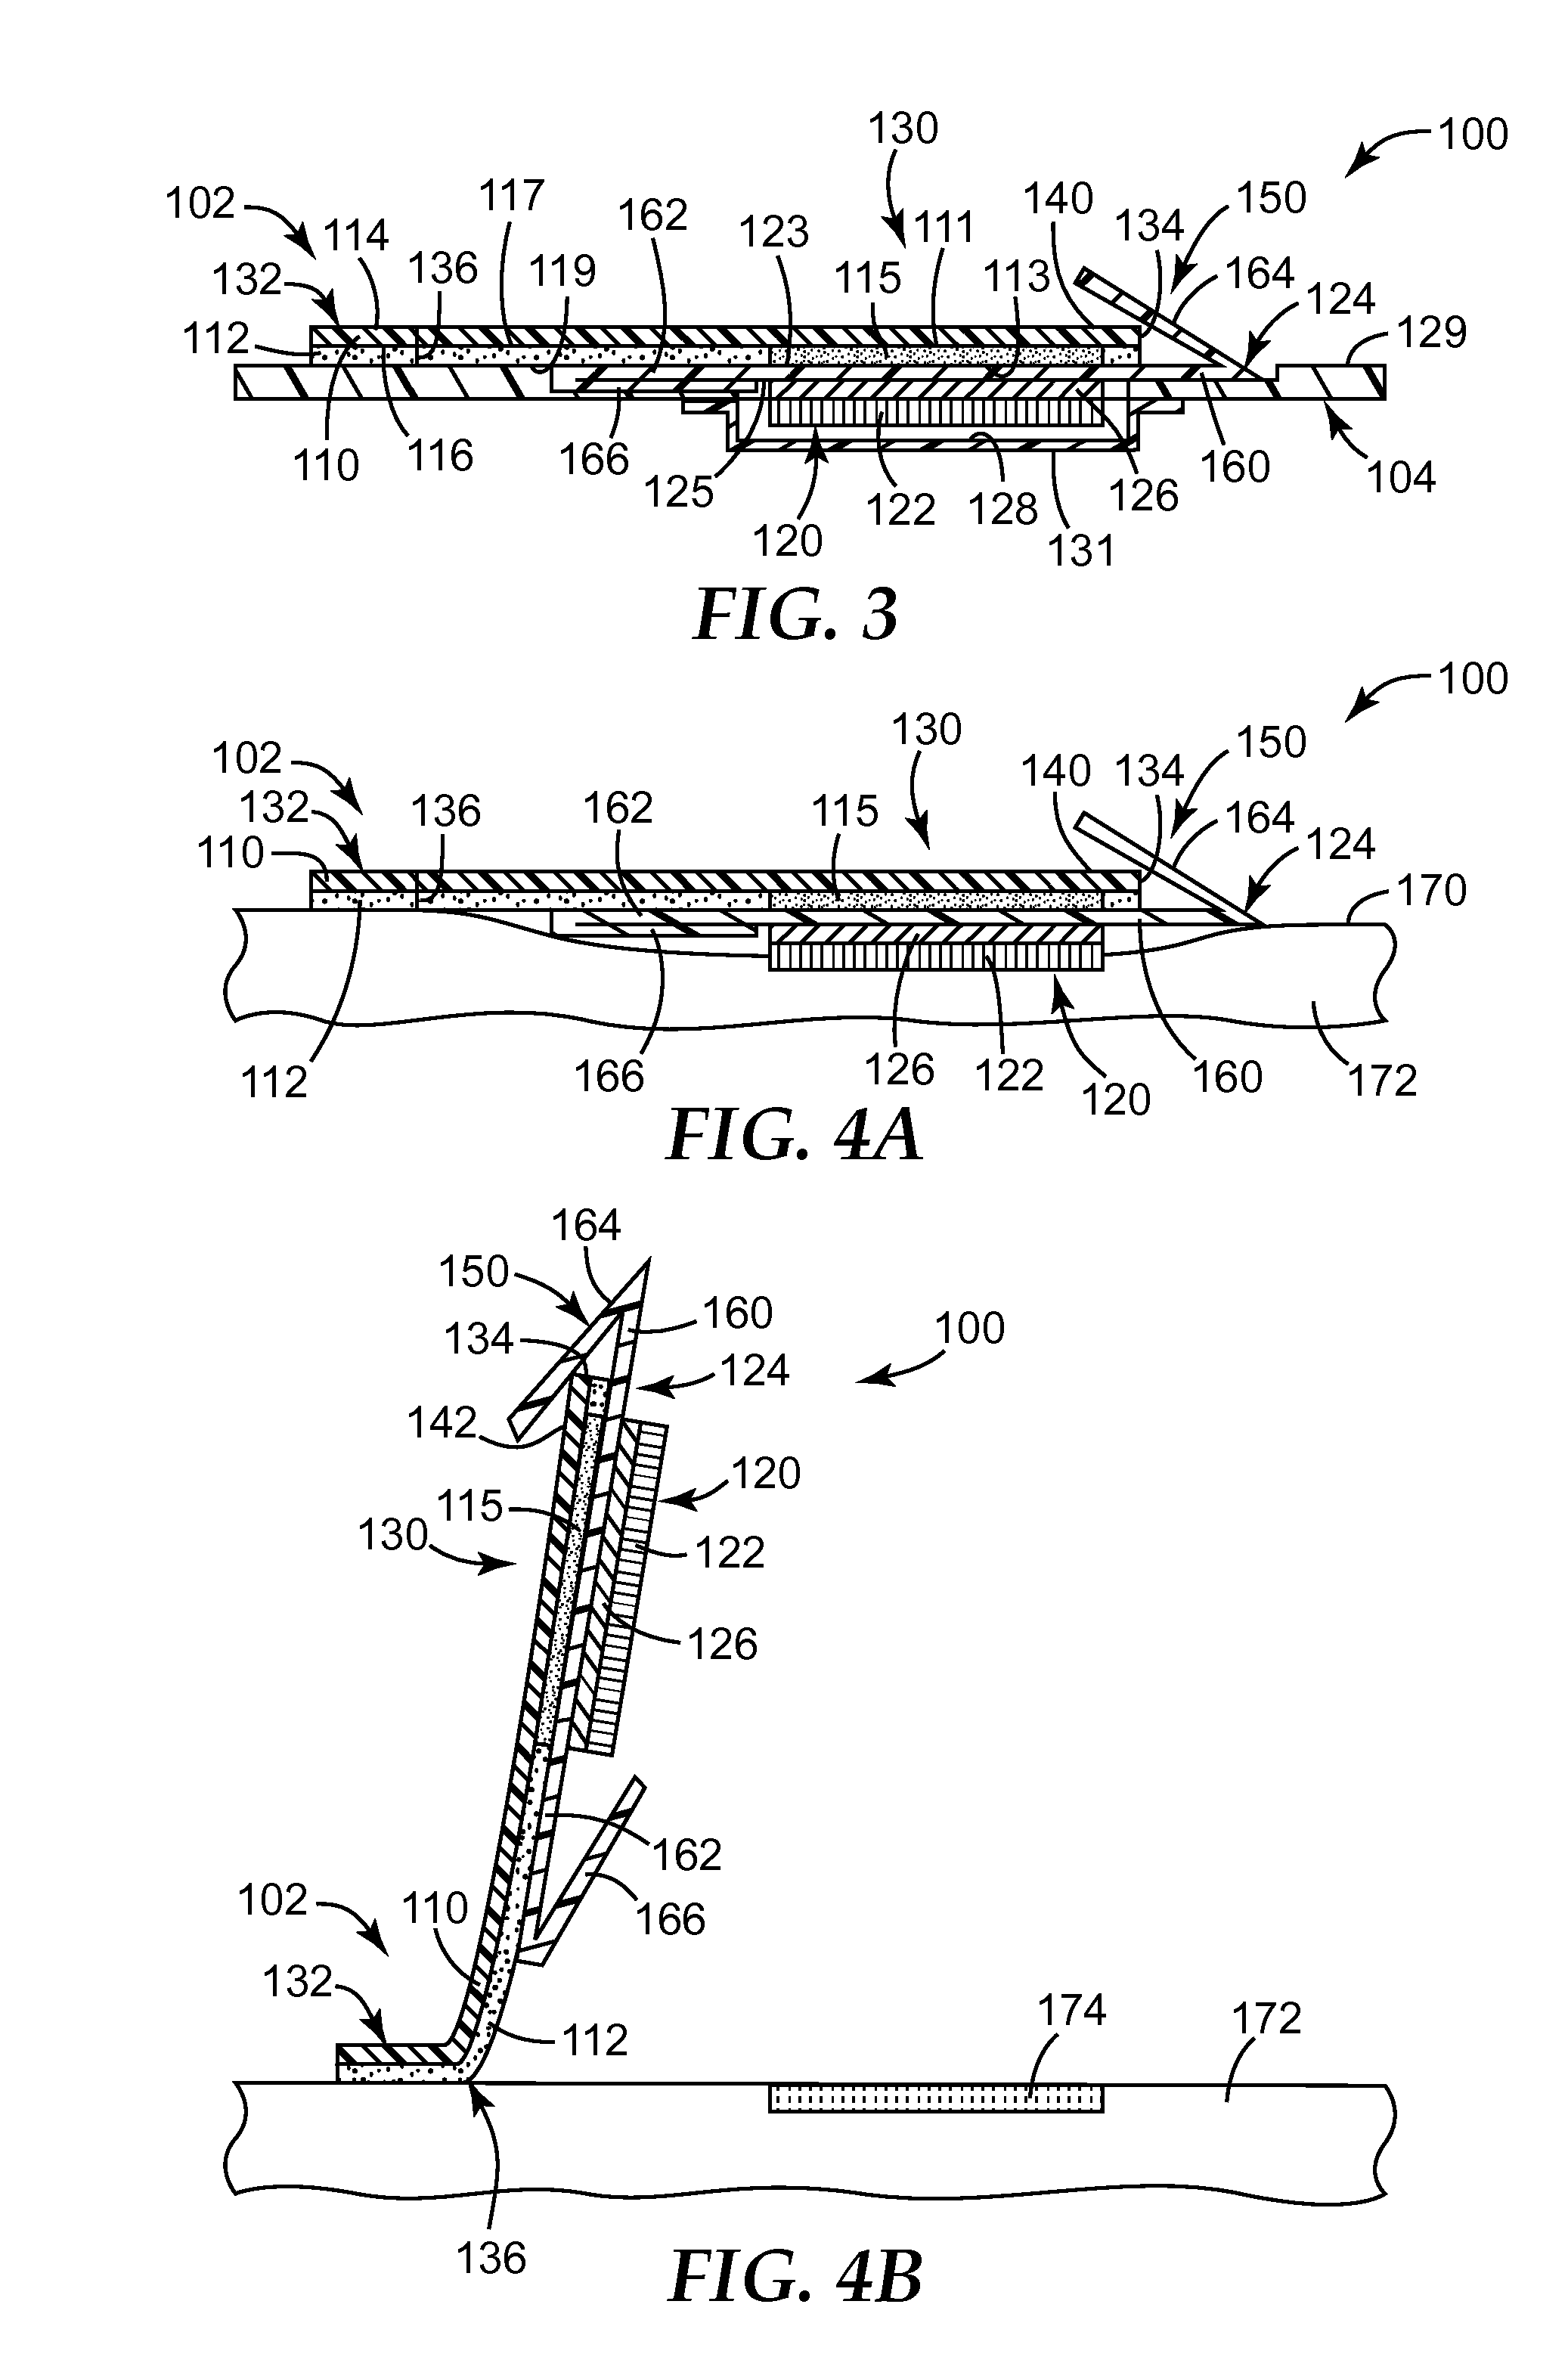 Transdermal adhesive patch assembly with removable microneedle array and method of using same